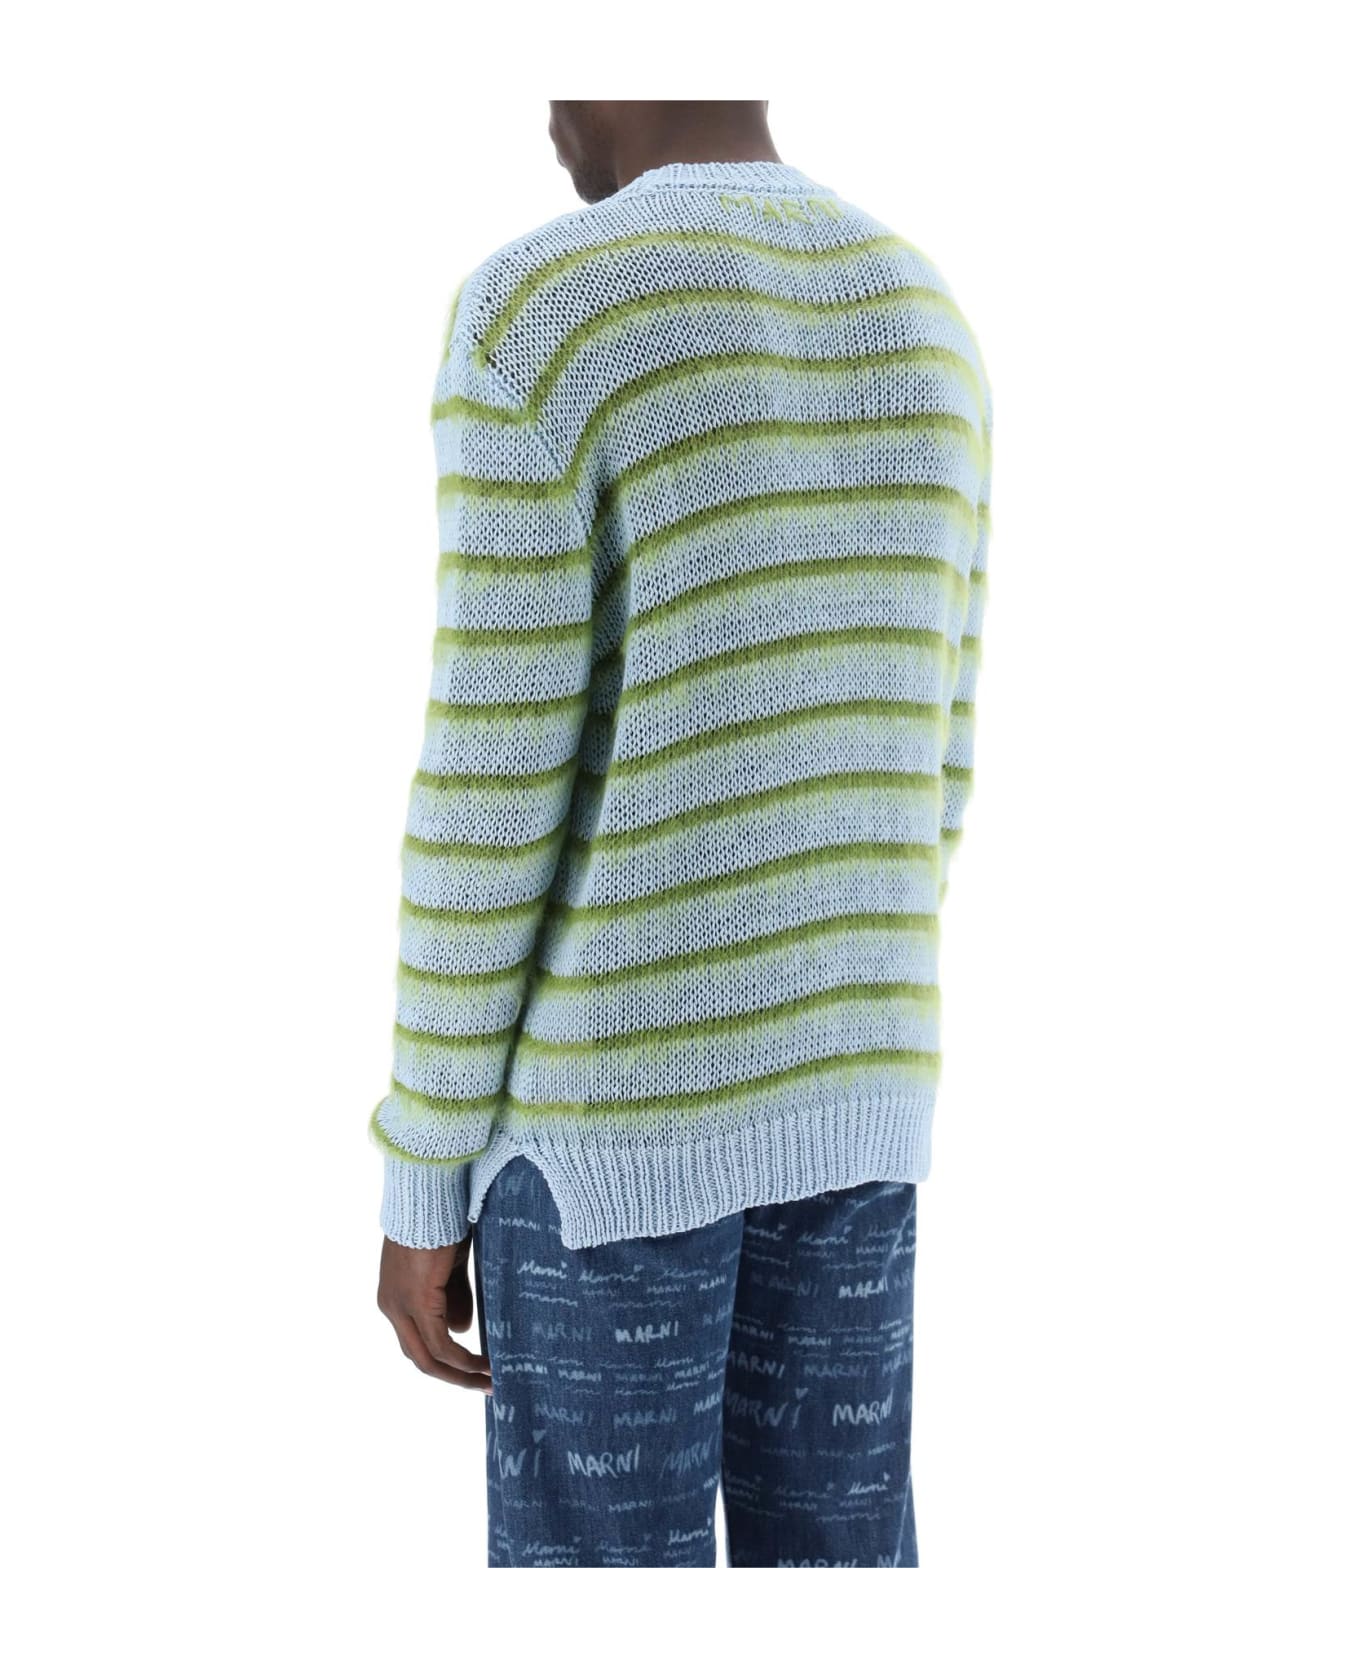 Marni Sweater In Striped Cotton And Mohair - IRIS BLUE (Light blue) ニットウェア